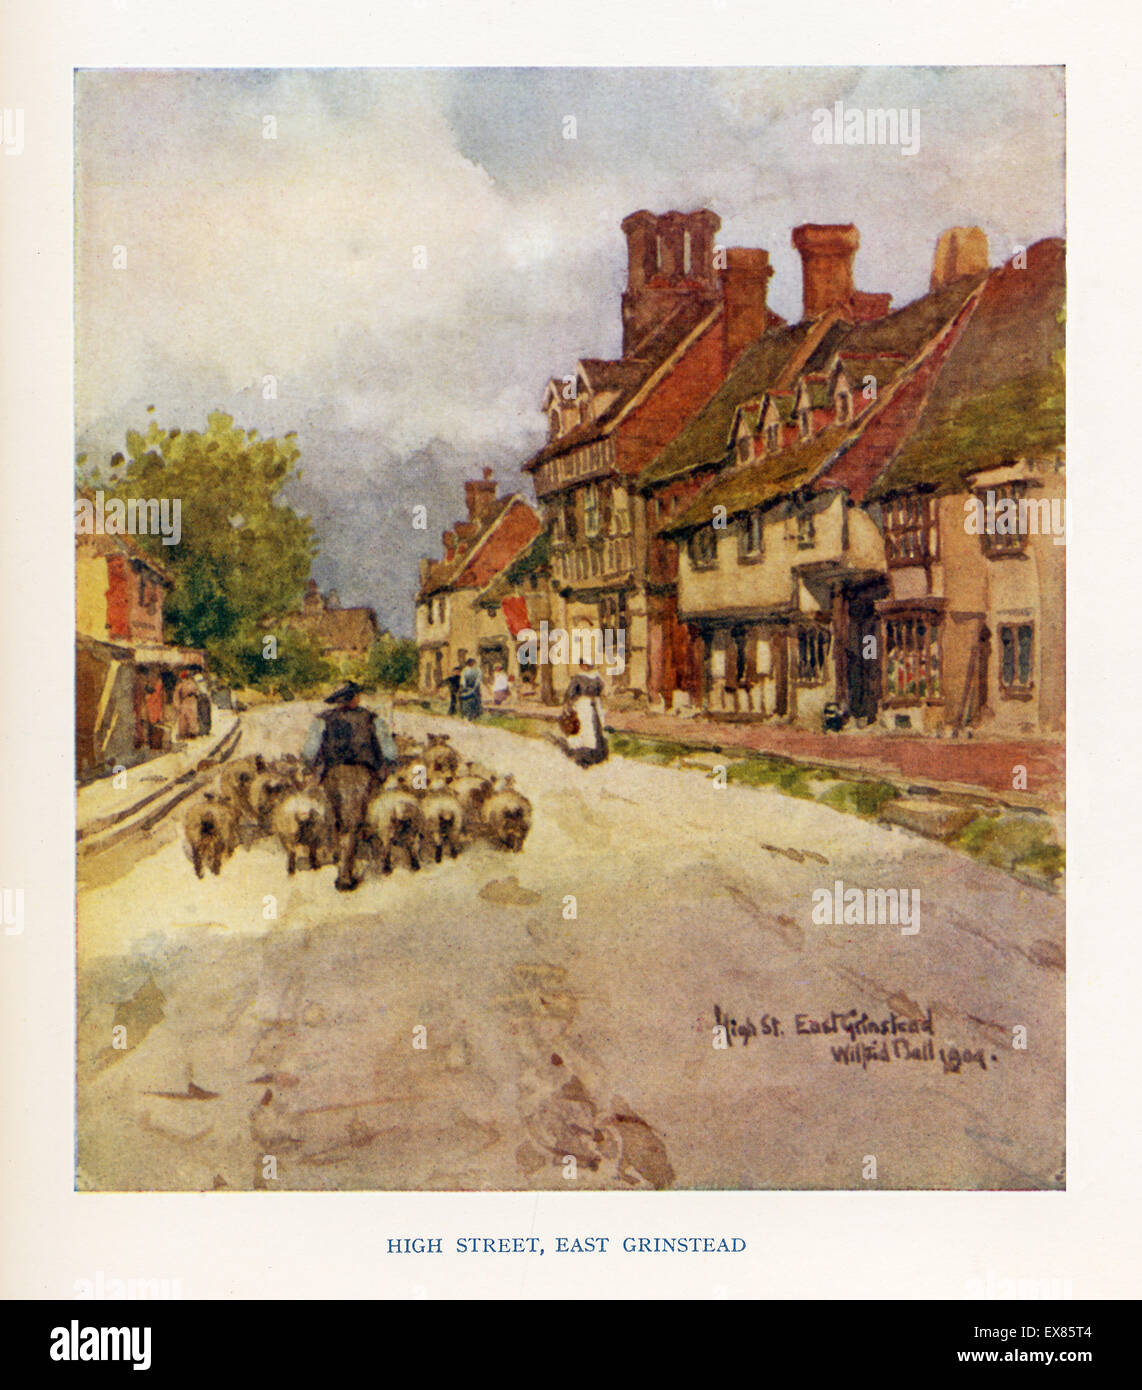 High Street, East Grinstead 1904 watercolour of a flock of sheep being driven through the town Stock Photo